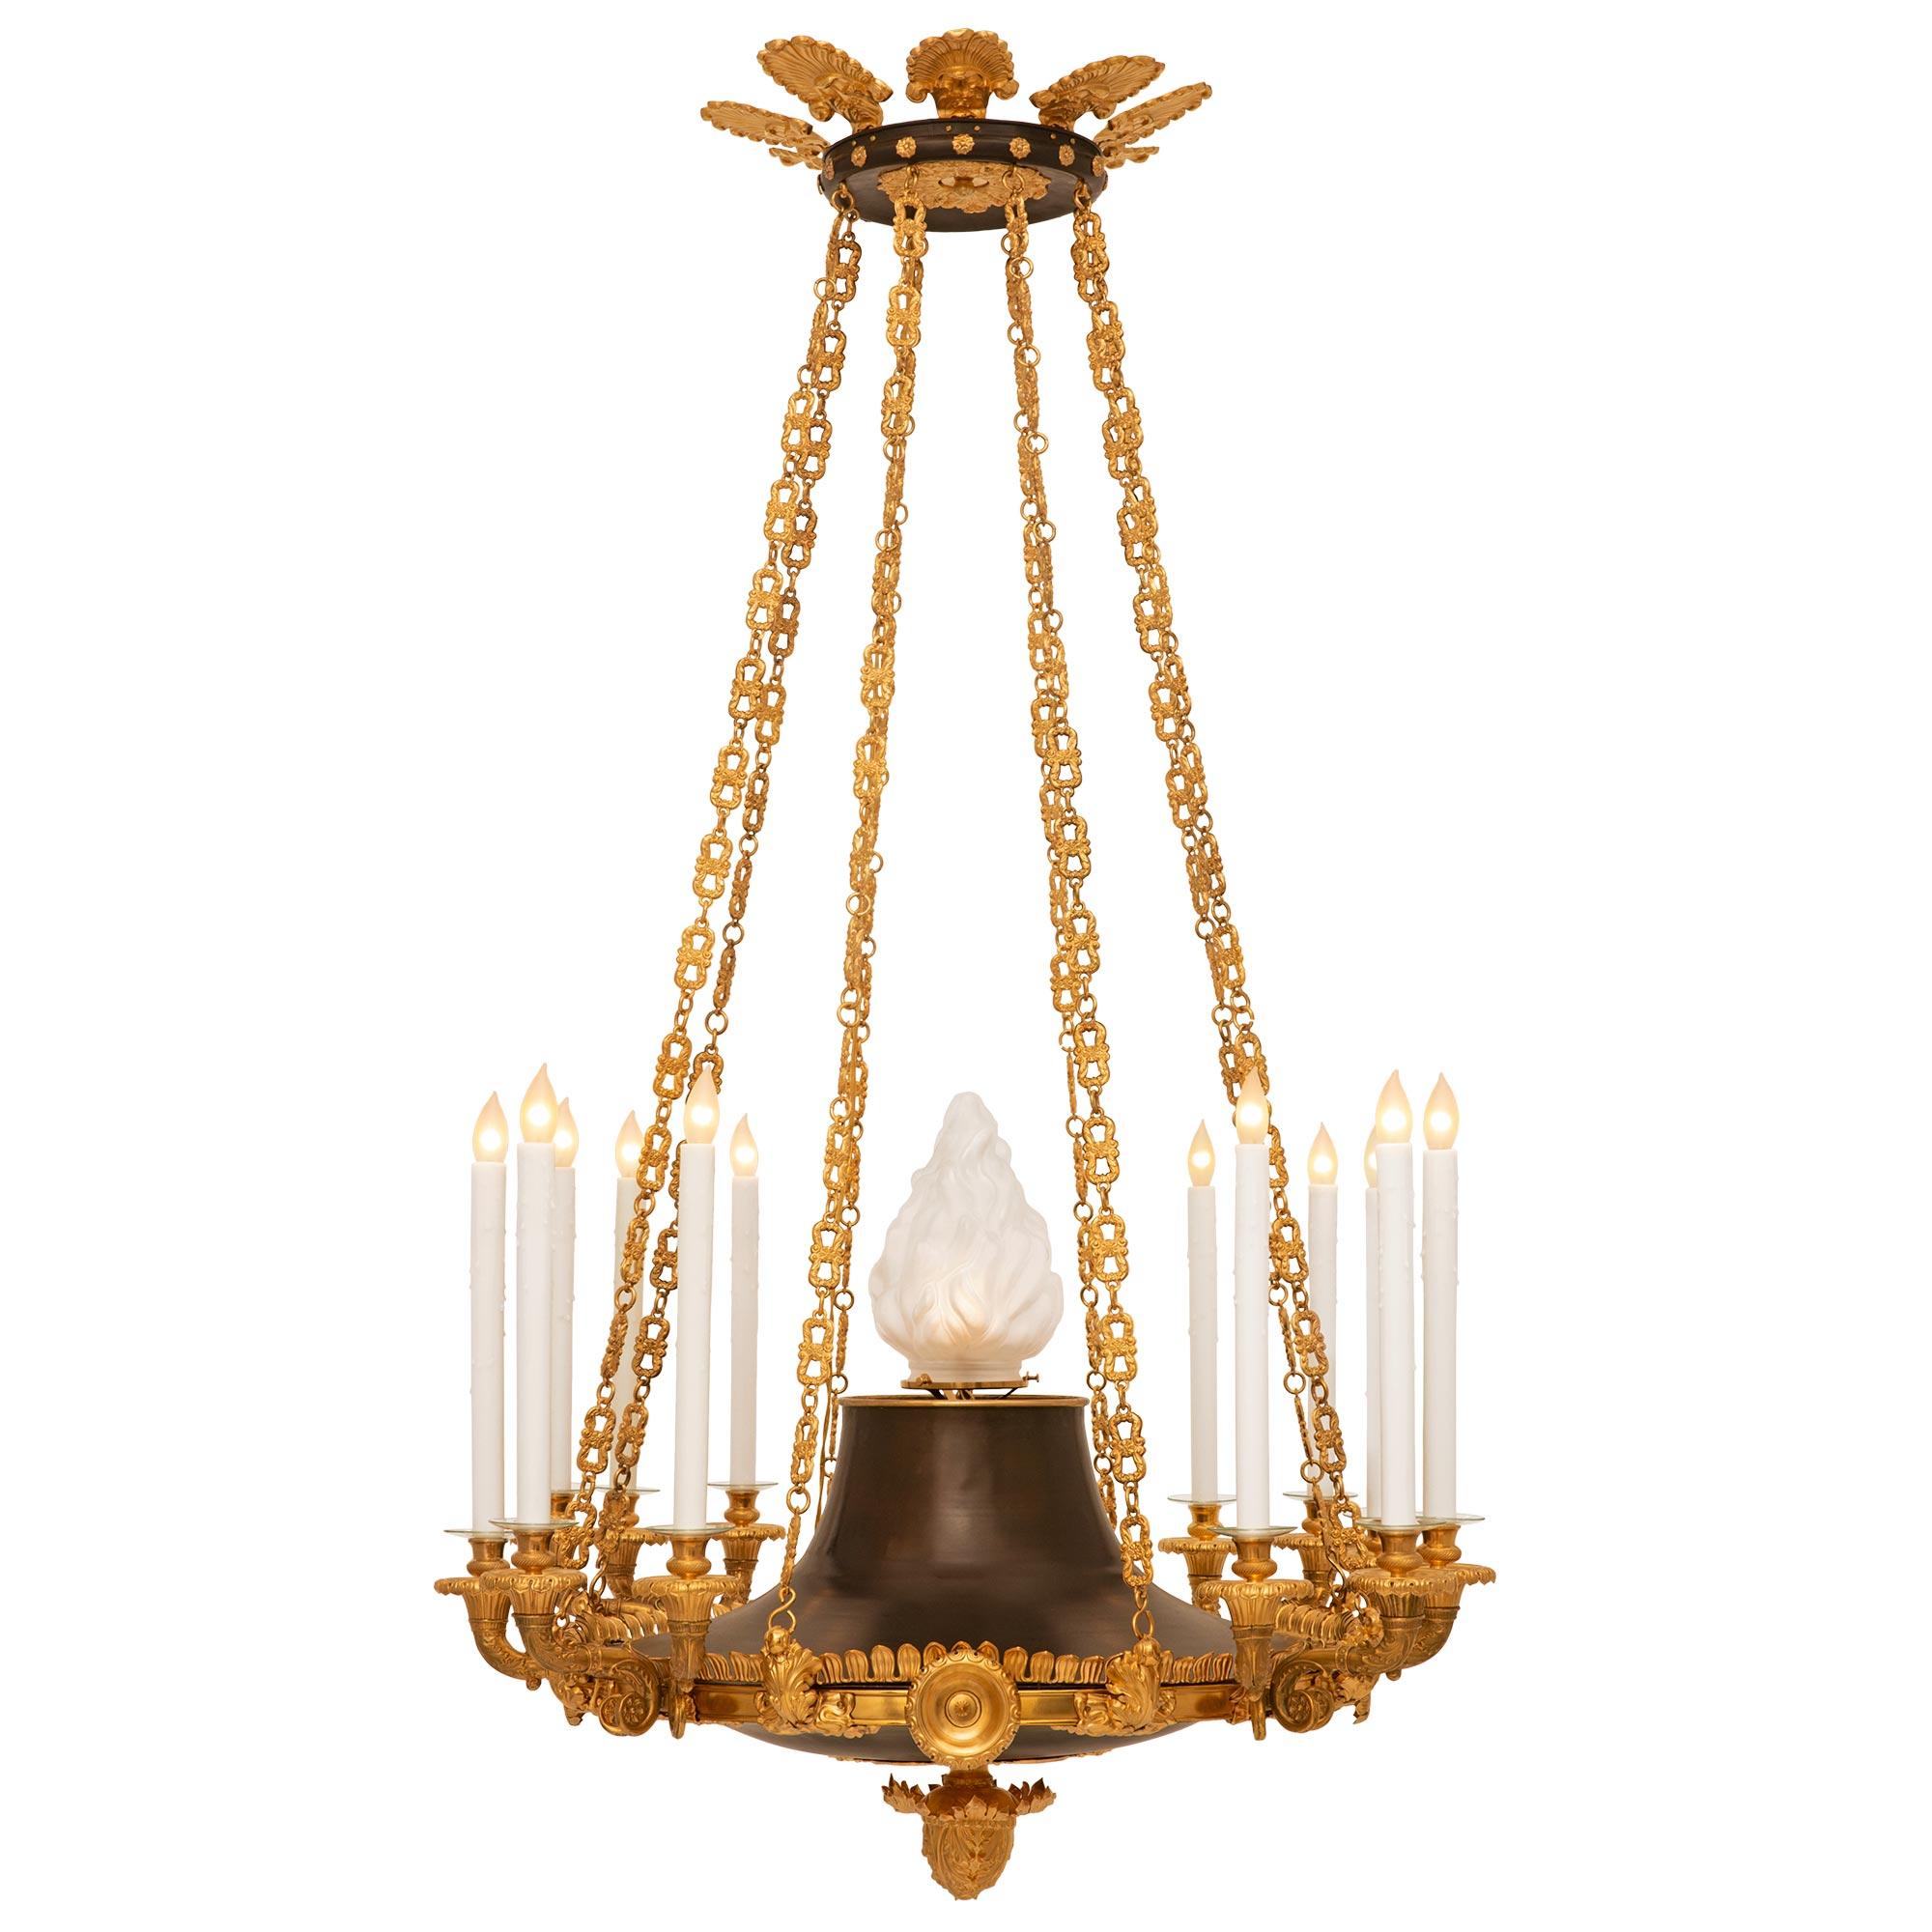 French 19th Century Charles X Period Patinated Bronze and Gilt Metal Chandelier In Good Condition For Sale In West Palm Beach, FL